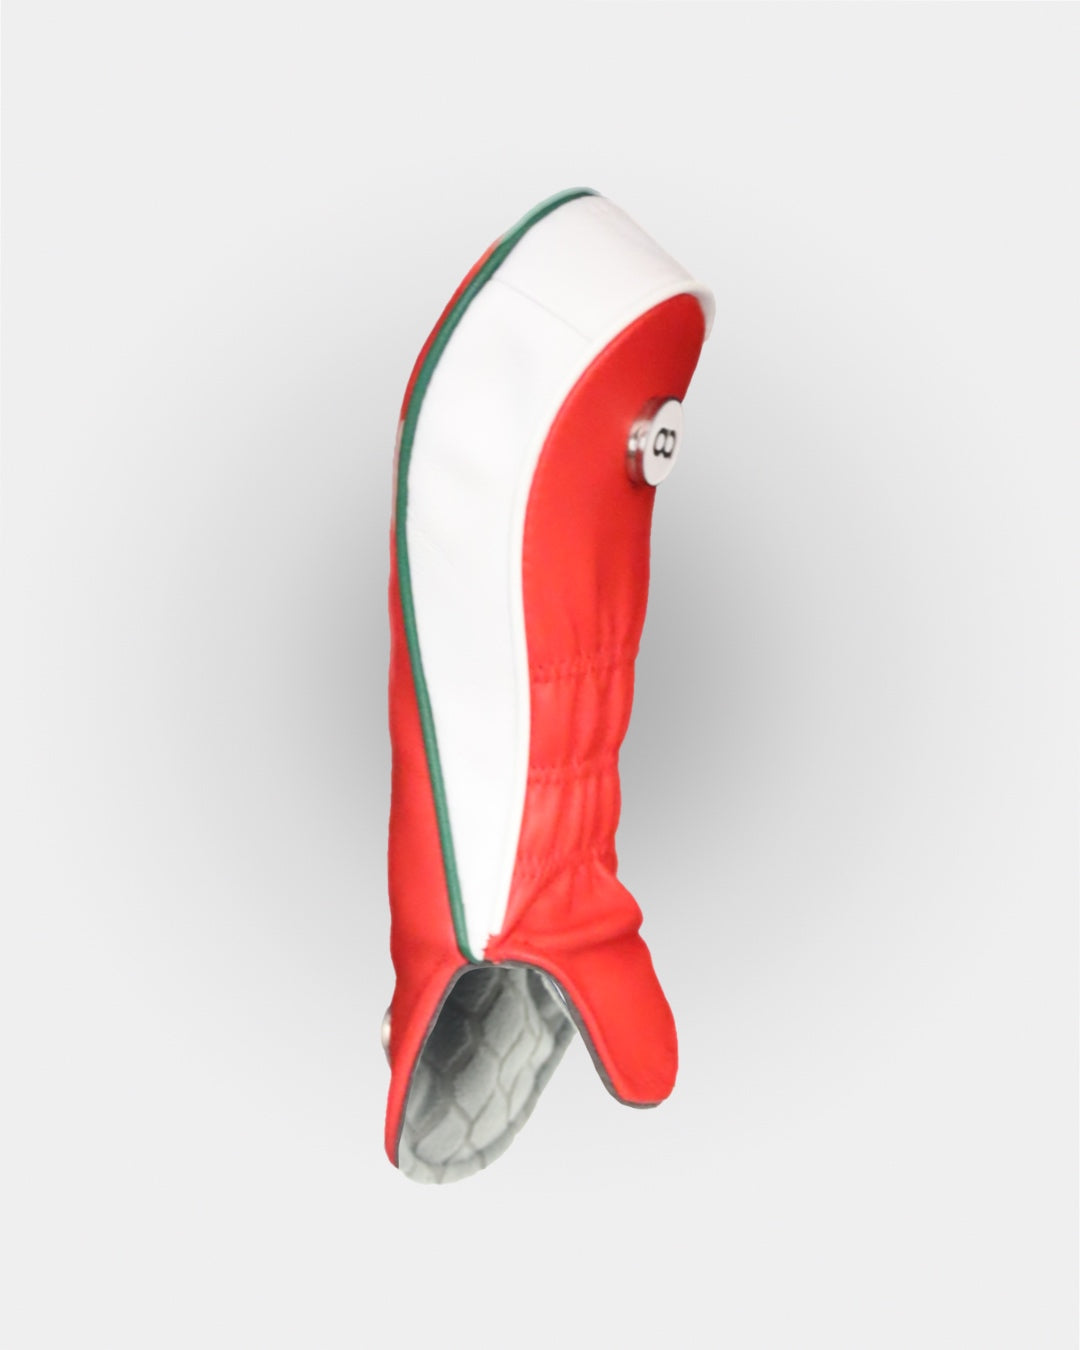 Wales red and white leather fairway wood headcover by David Alexander